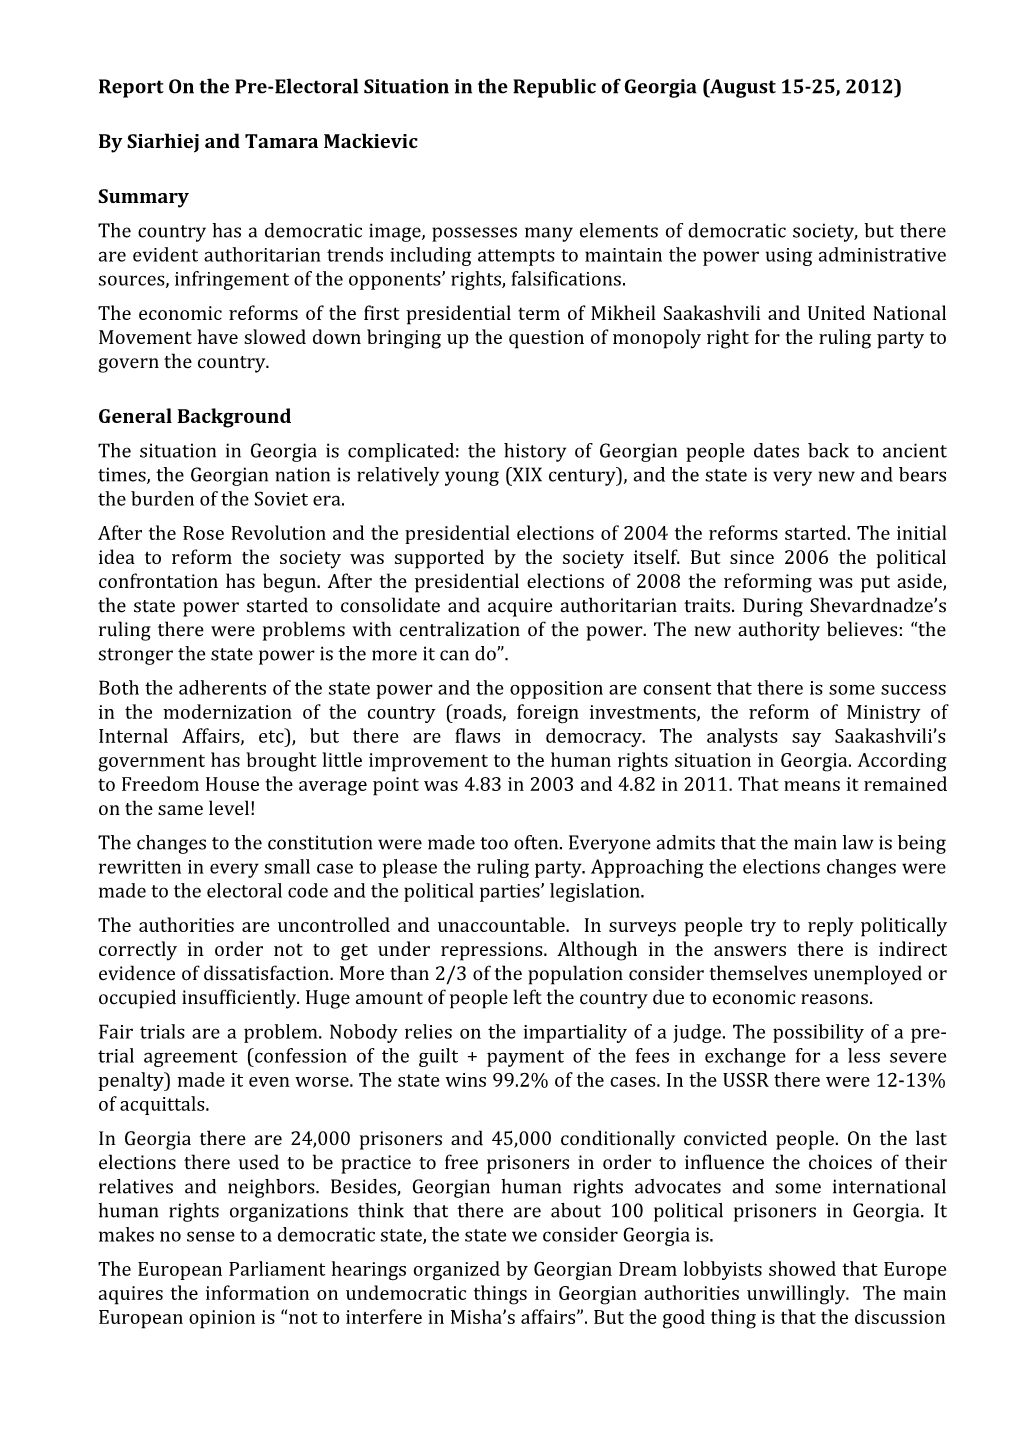 Report On The Pre-Electoral Situation In The Republic Of Georgia (August 15-25, 2012)